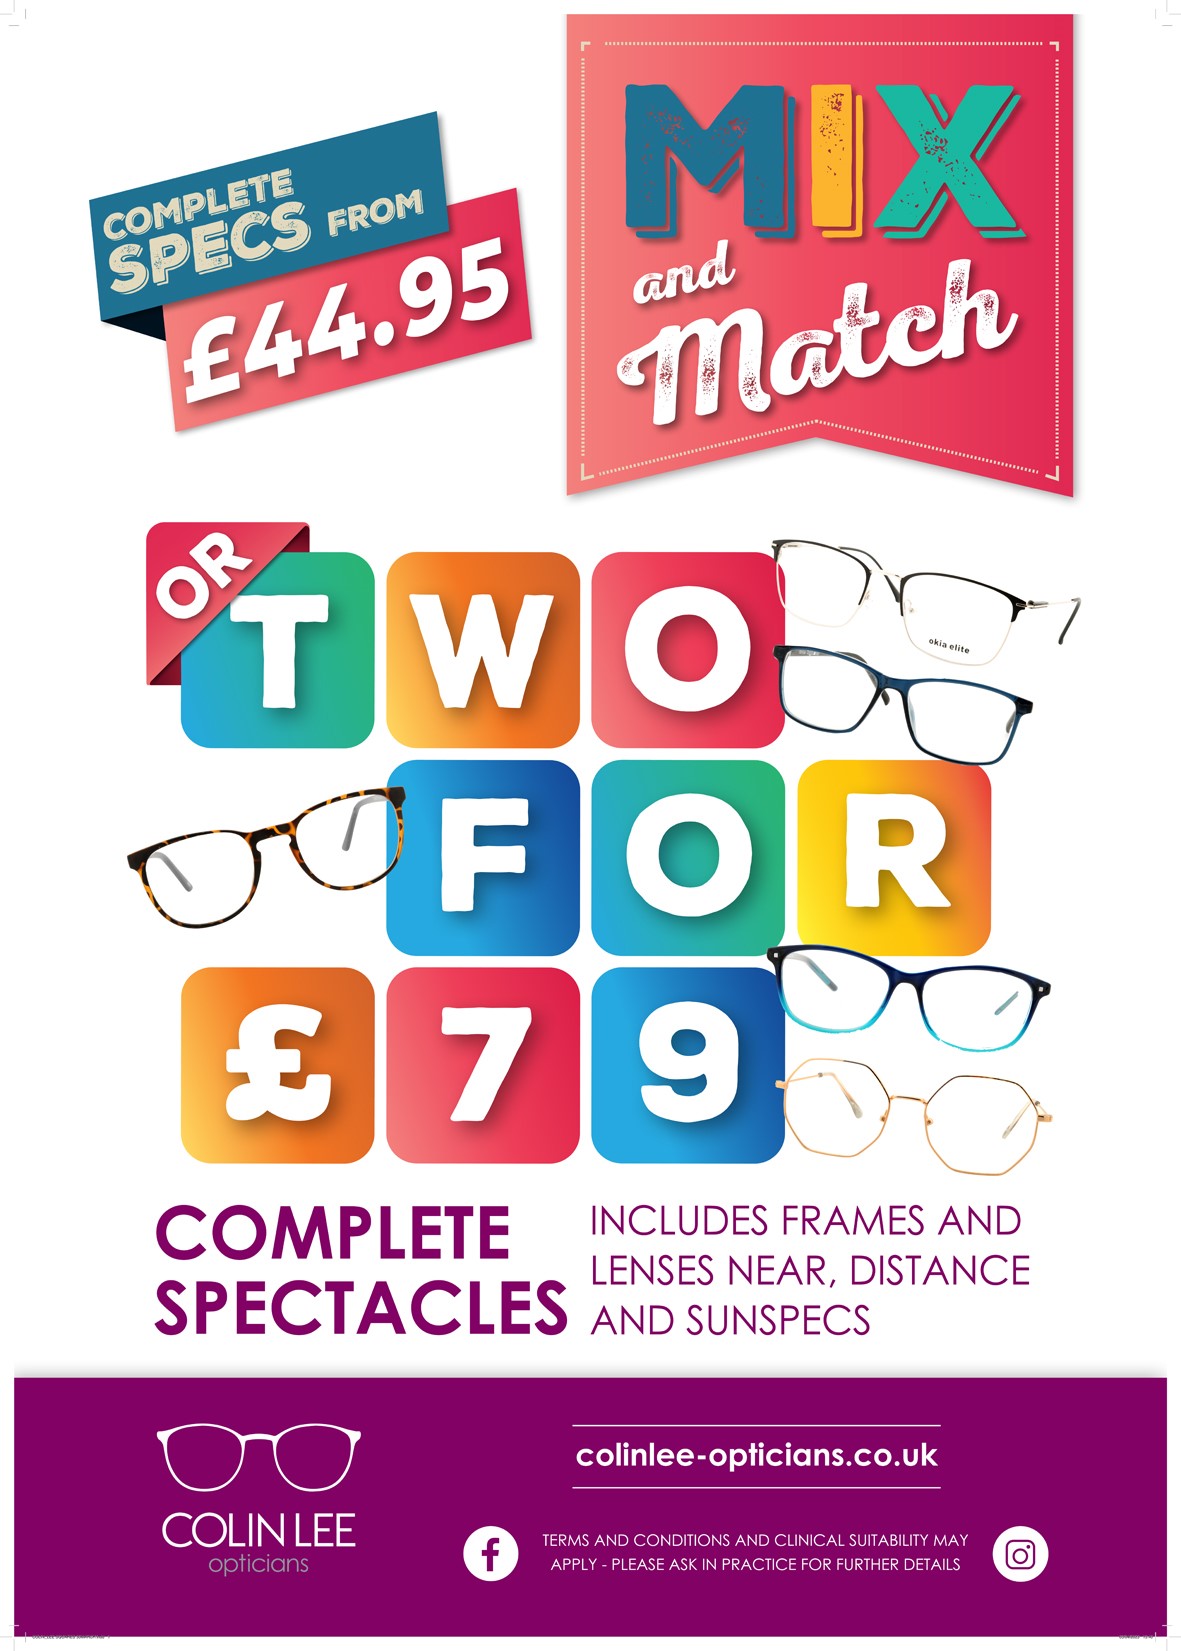 Mix and Match, complete priced specs from £44.95